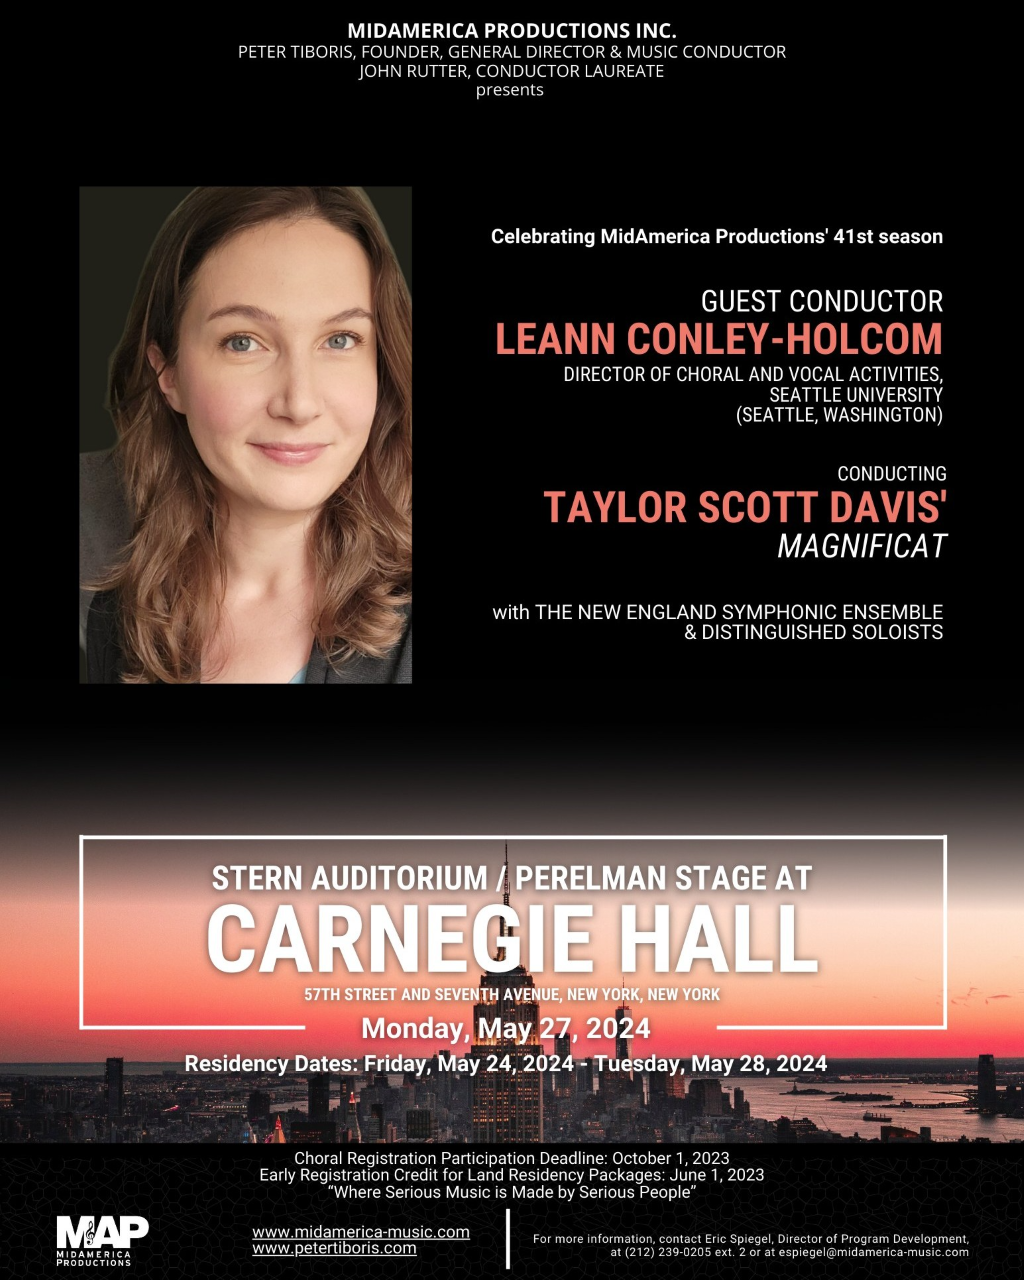 Leann Conley-Holcom to perform at Carnegie Hall